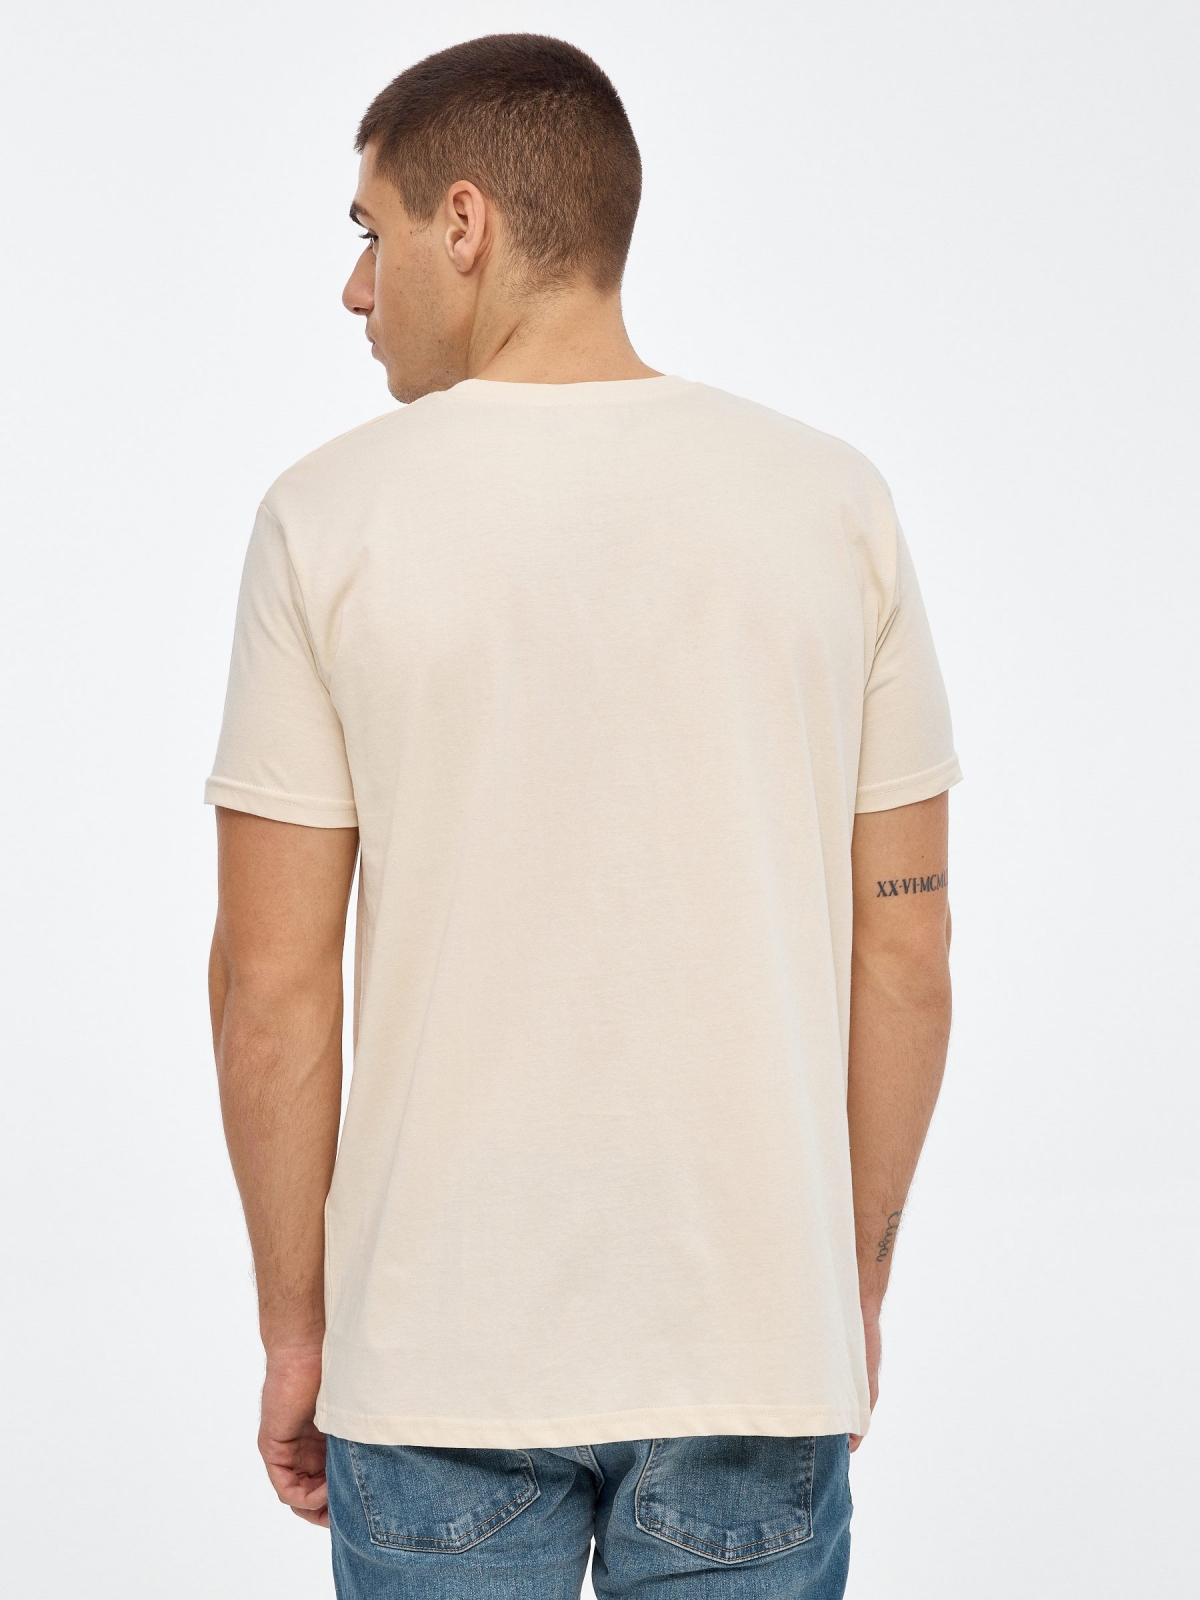 Skull printed t-shirt sand middle back view